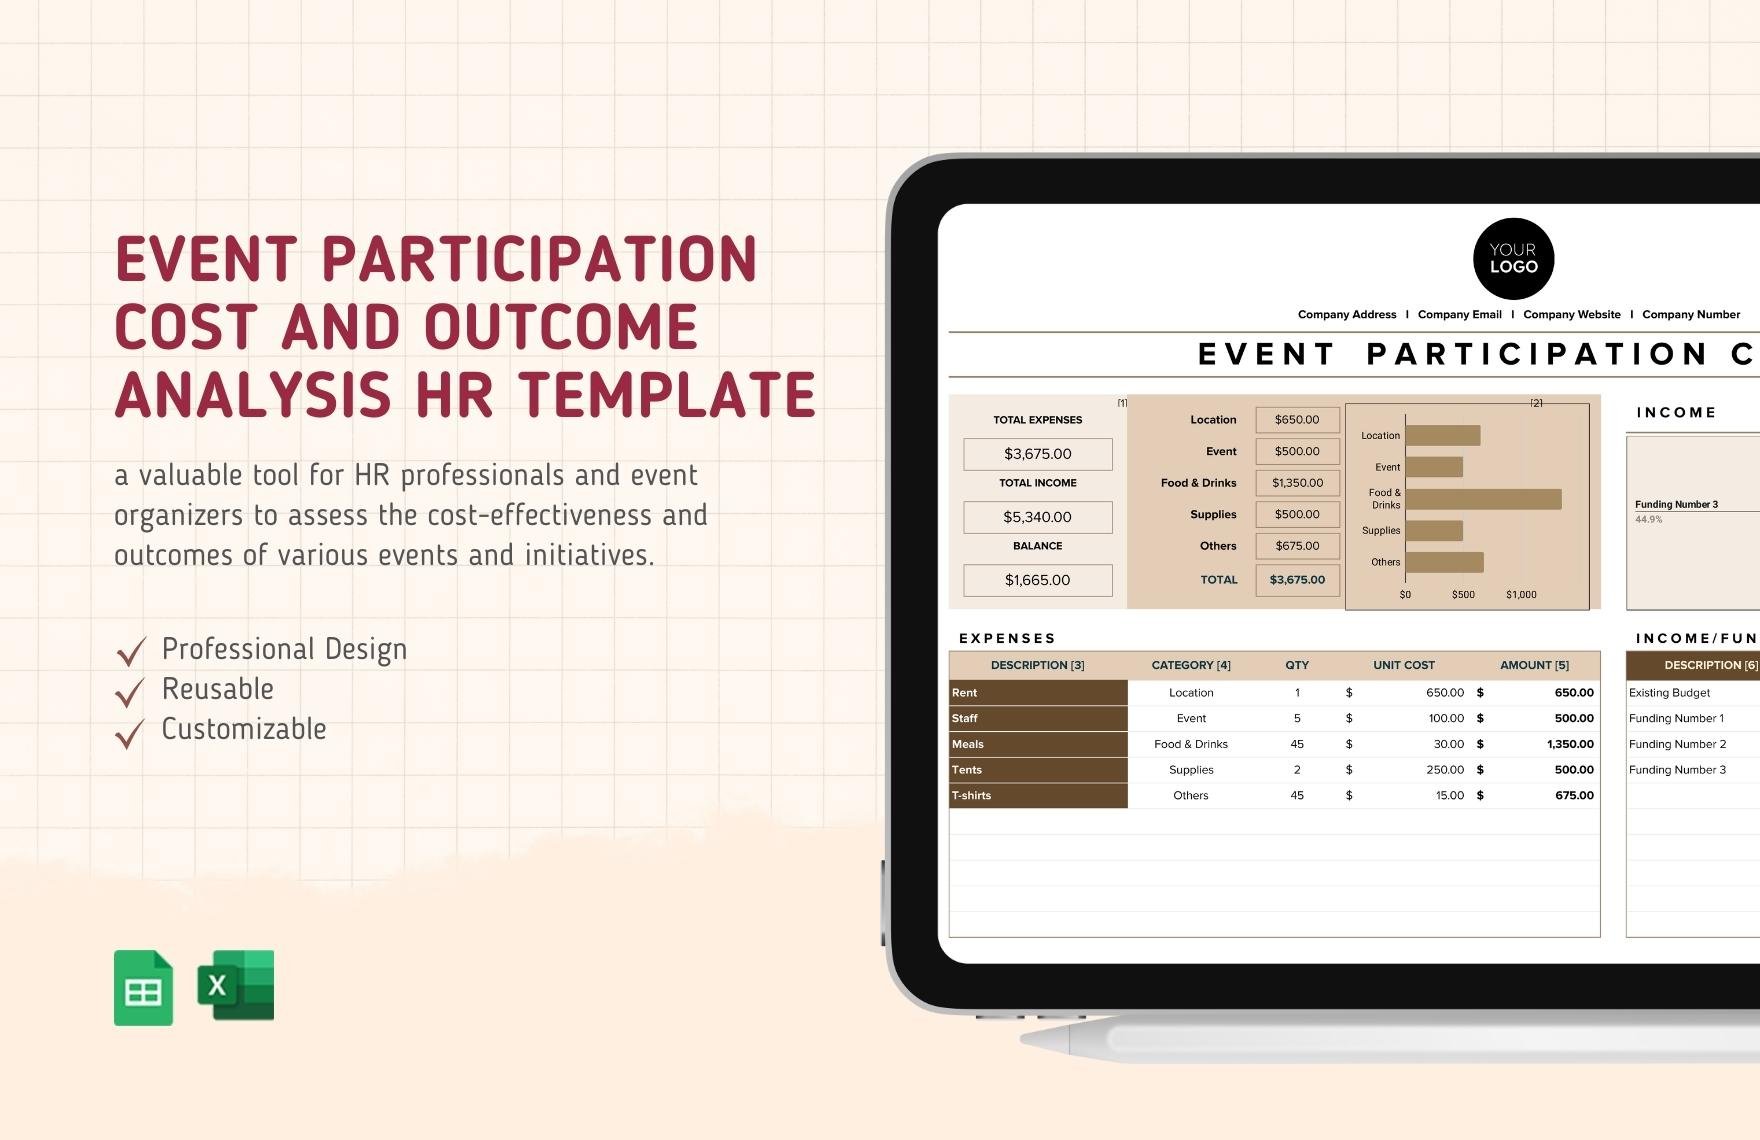 Event Participation Cost and Outcome Analysis HR Template